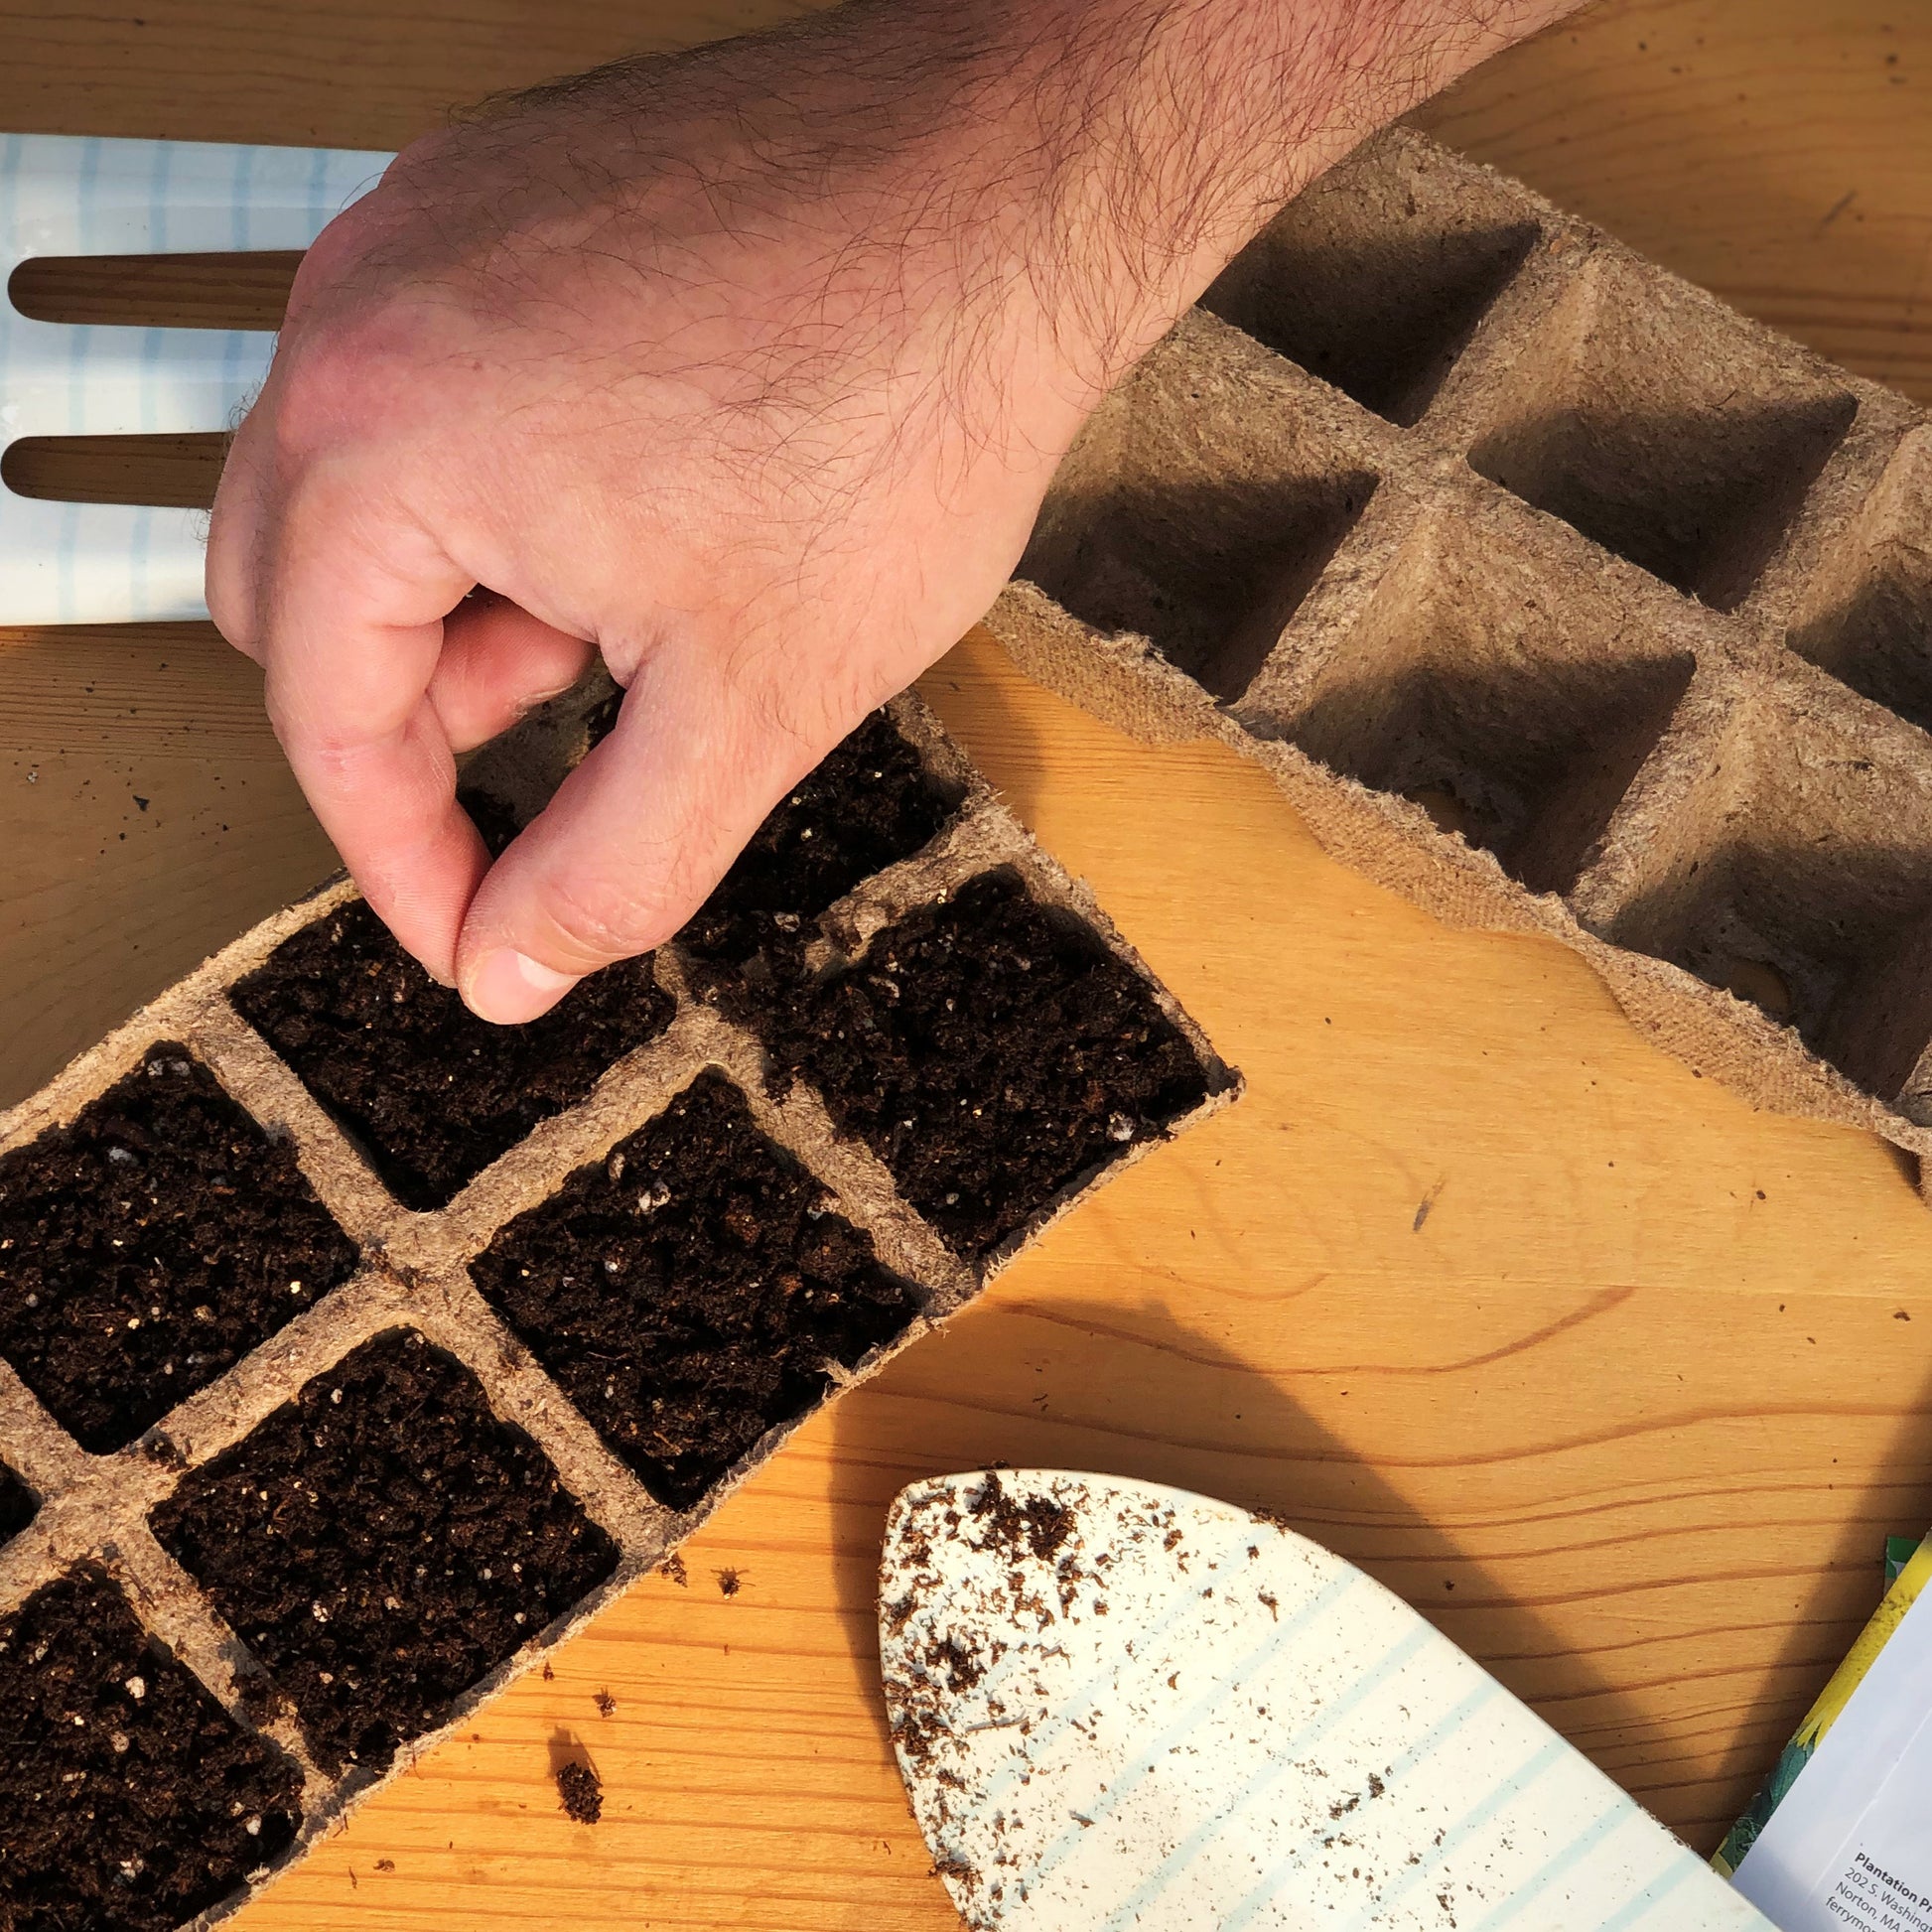 Start Mixed Colors African Daisy seeds in biodegradable paper or peat strips.